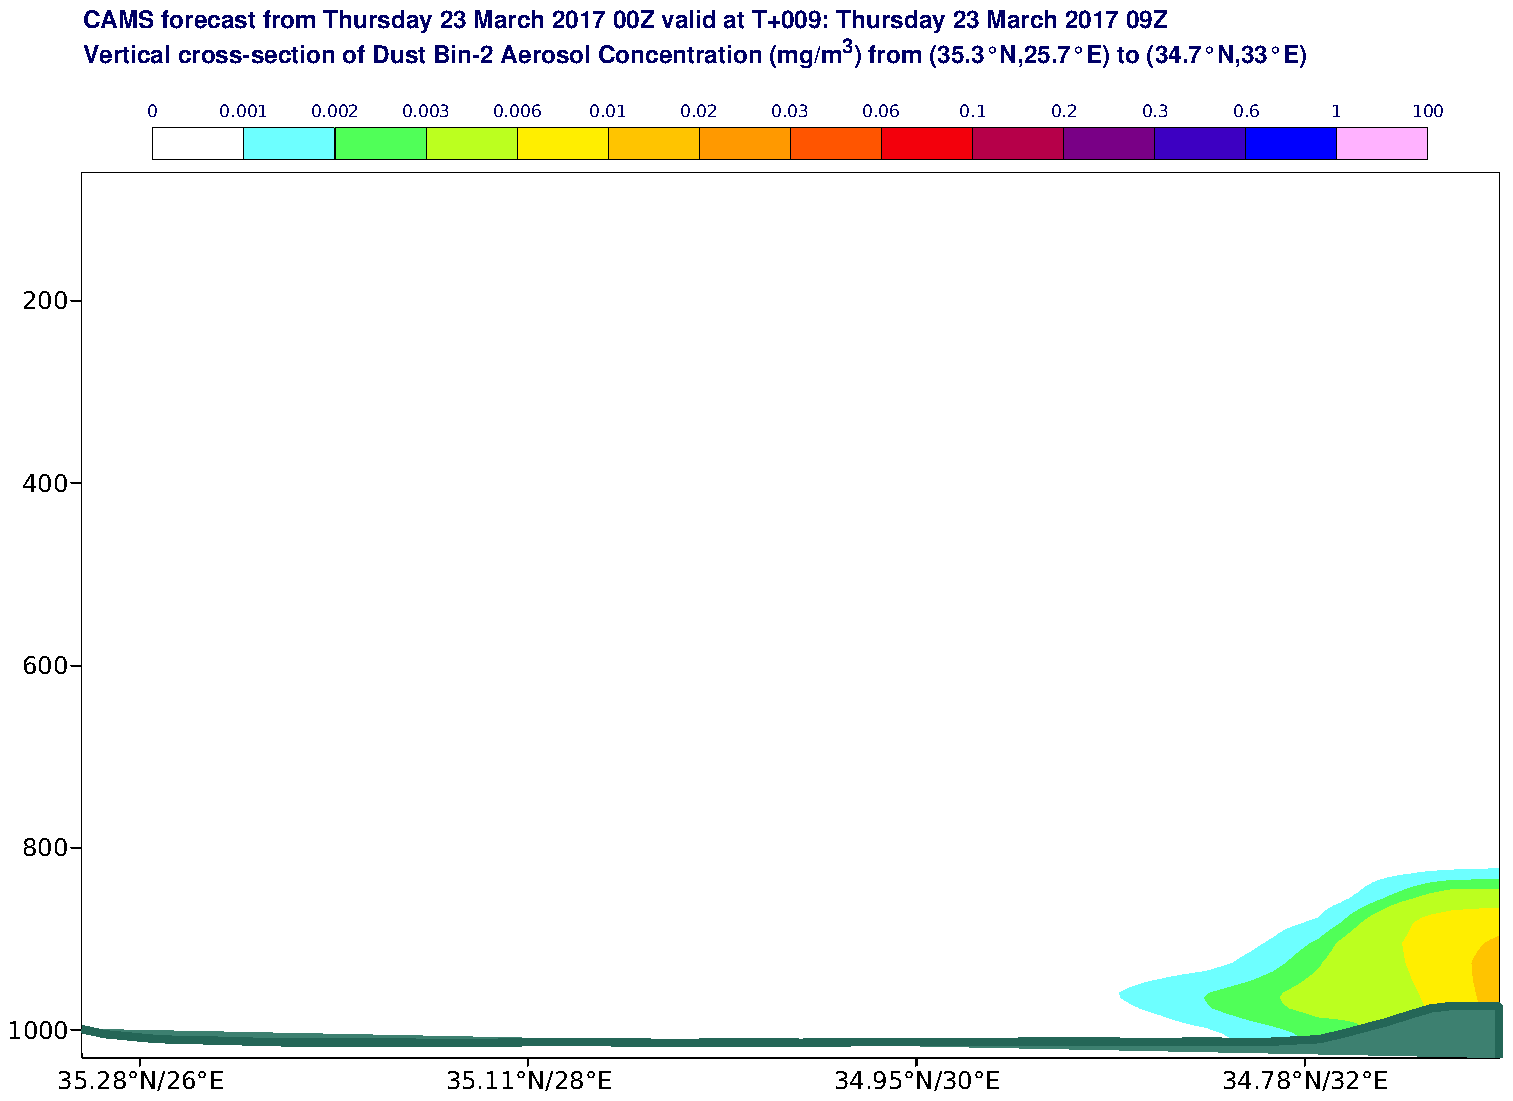 Vertical cross-section of Dust Bin-2 Aerosol Concentration (mg/m3) valid at T9 - 2017-03-23 09:00